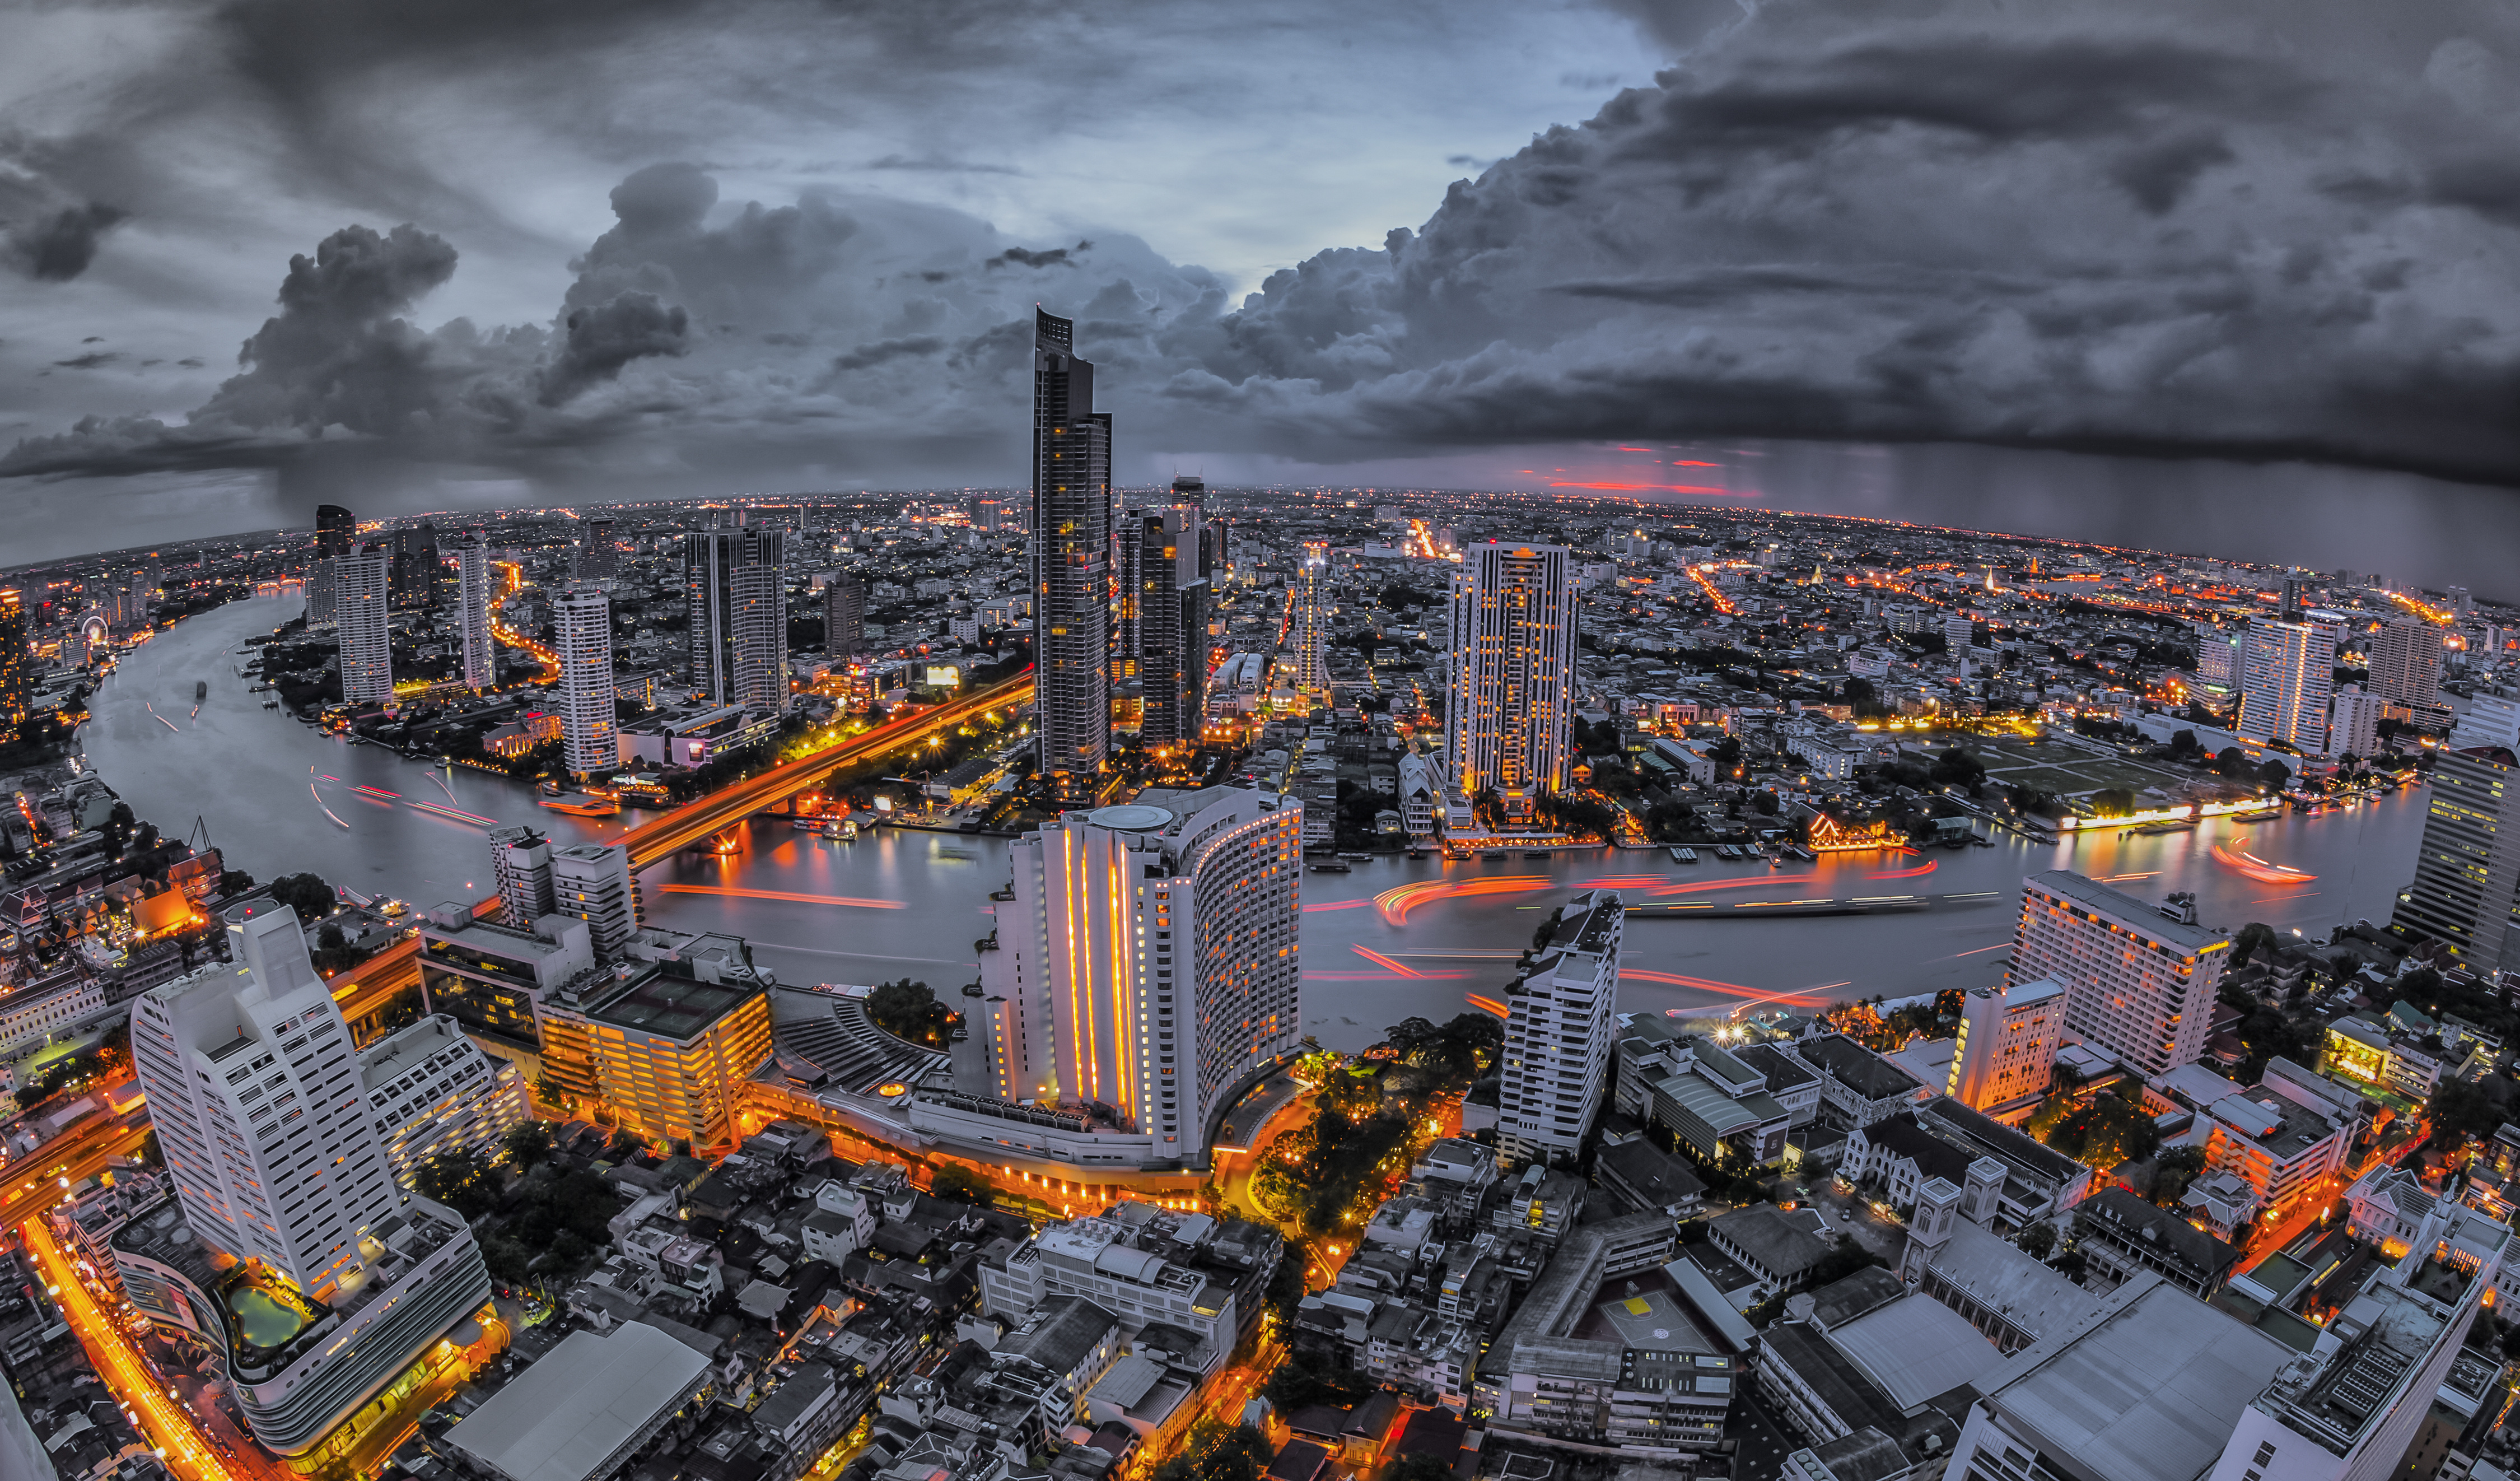 cities, bangkok, view from above, night city, skyscrapers, megapolis, megalopolis